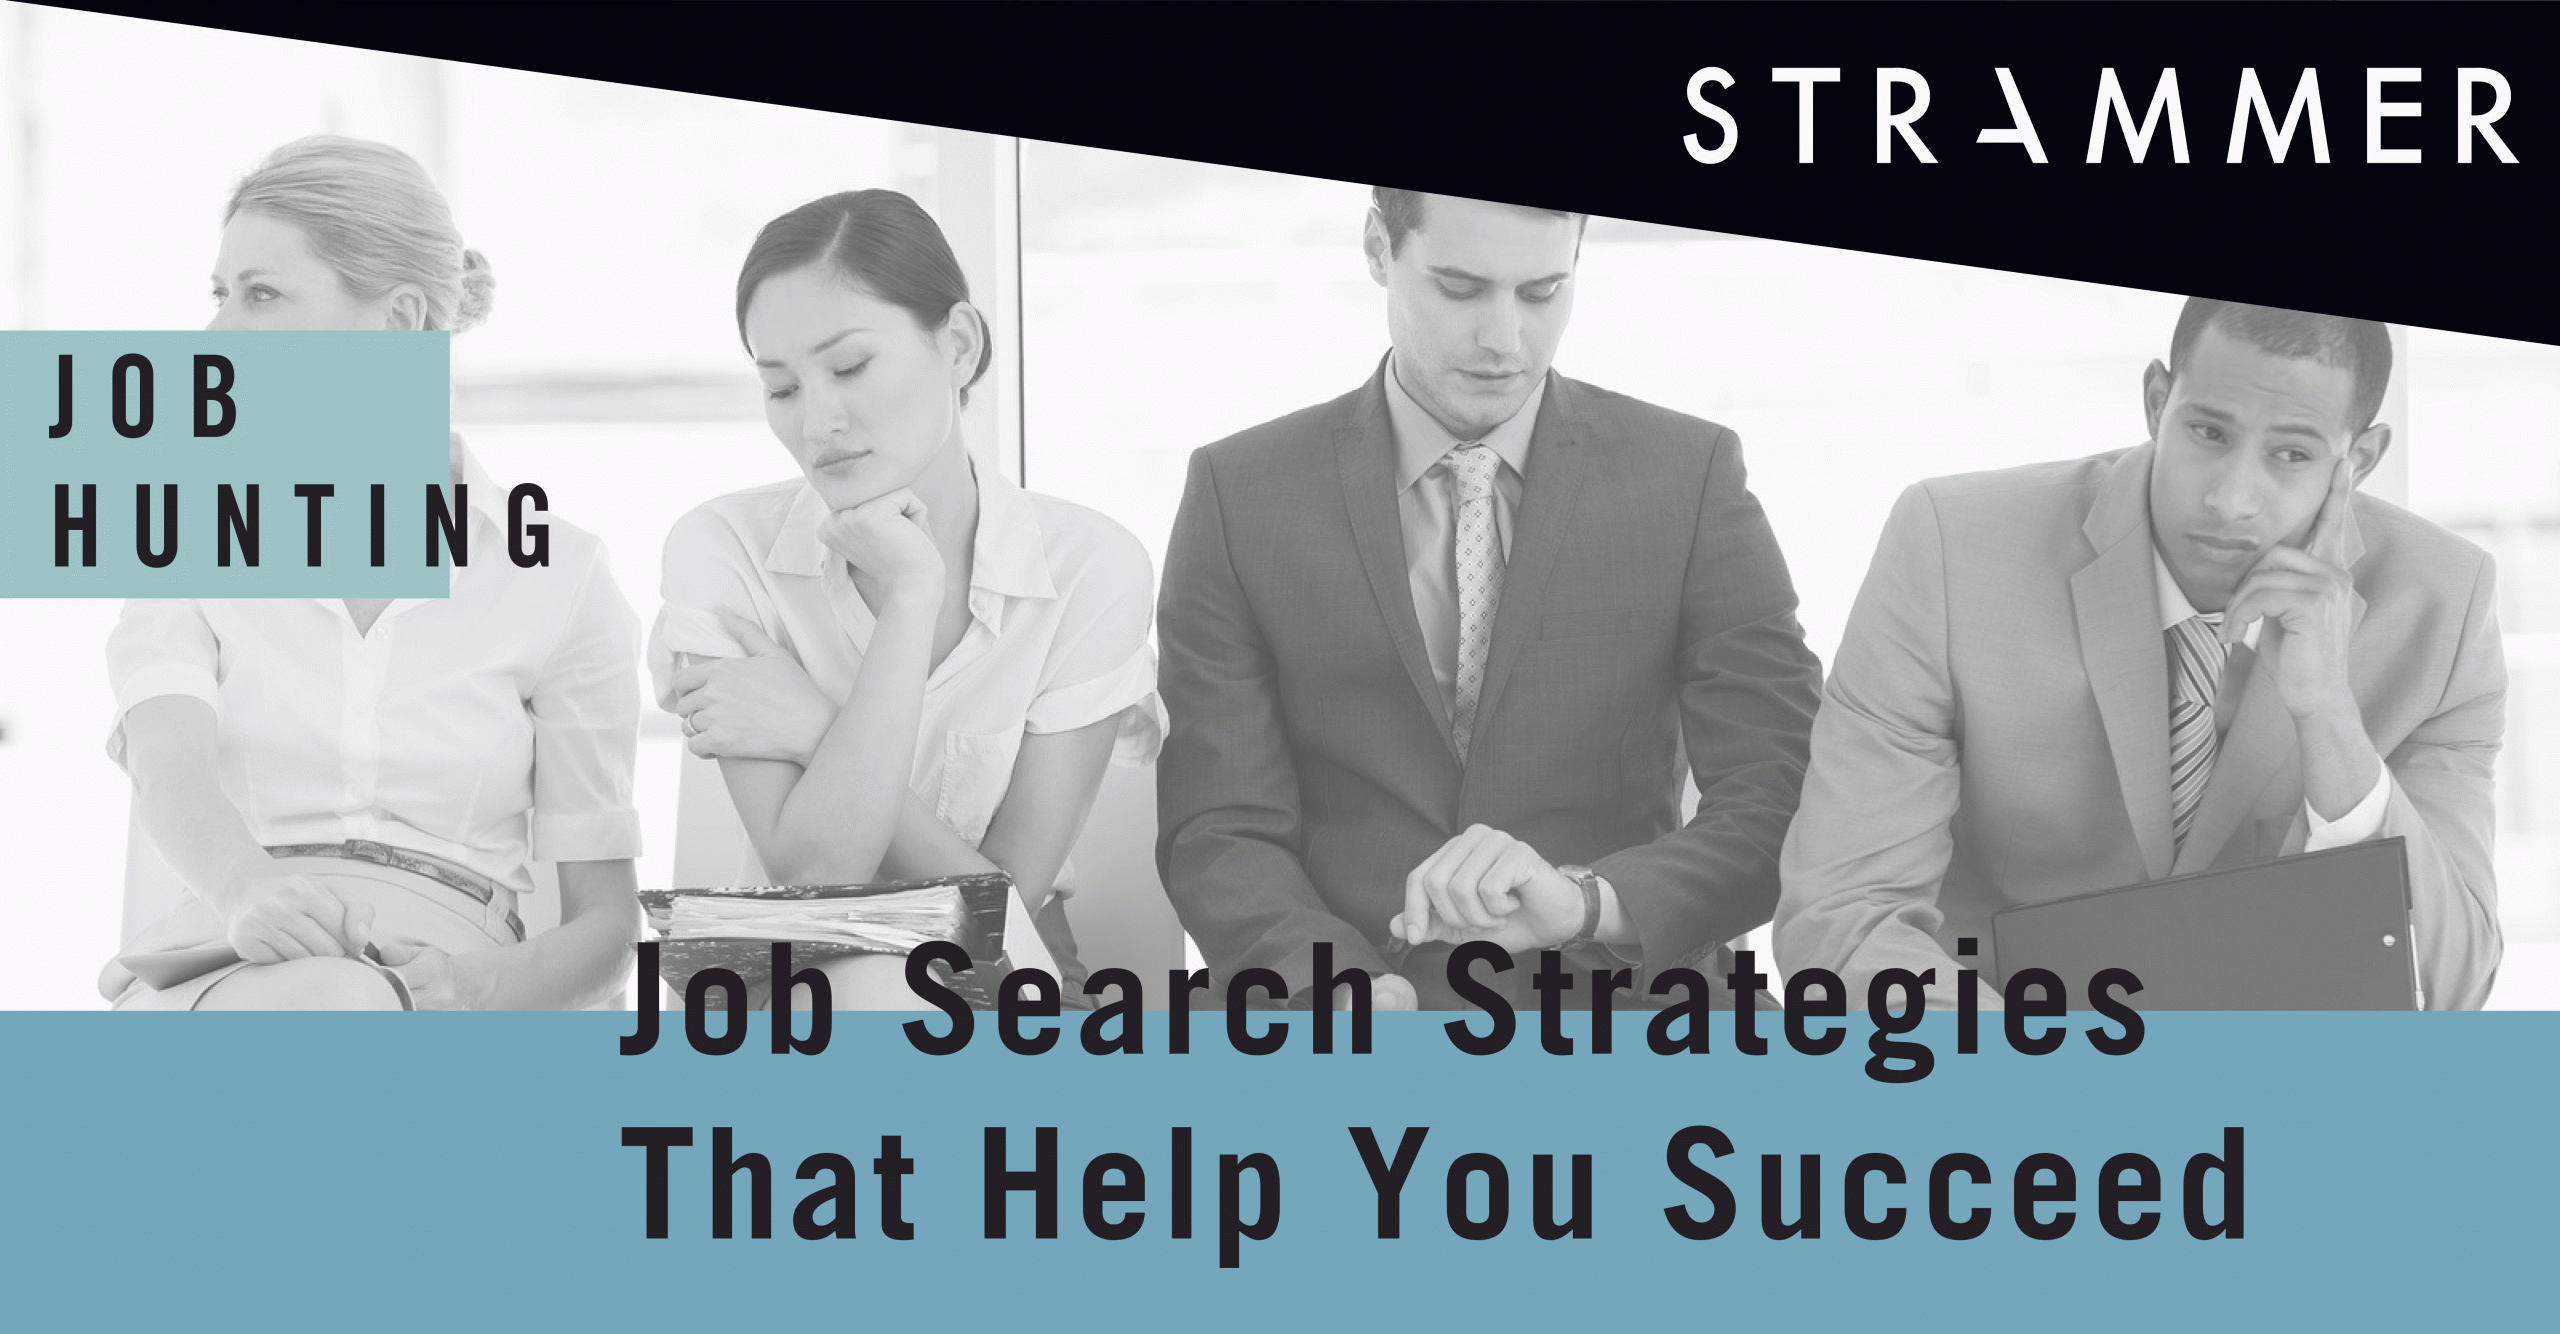 Job Searching: Strategies to Be Successful